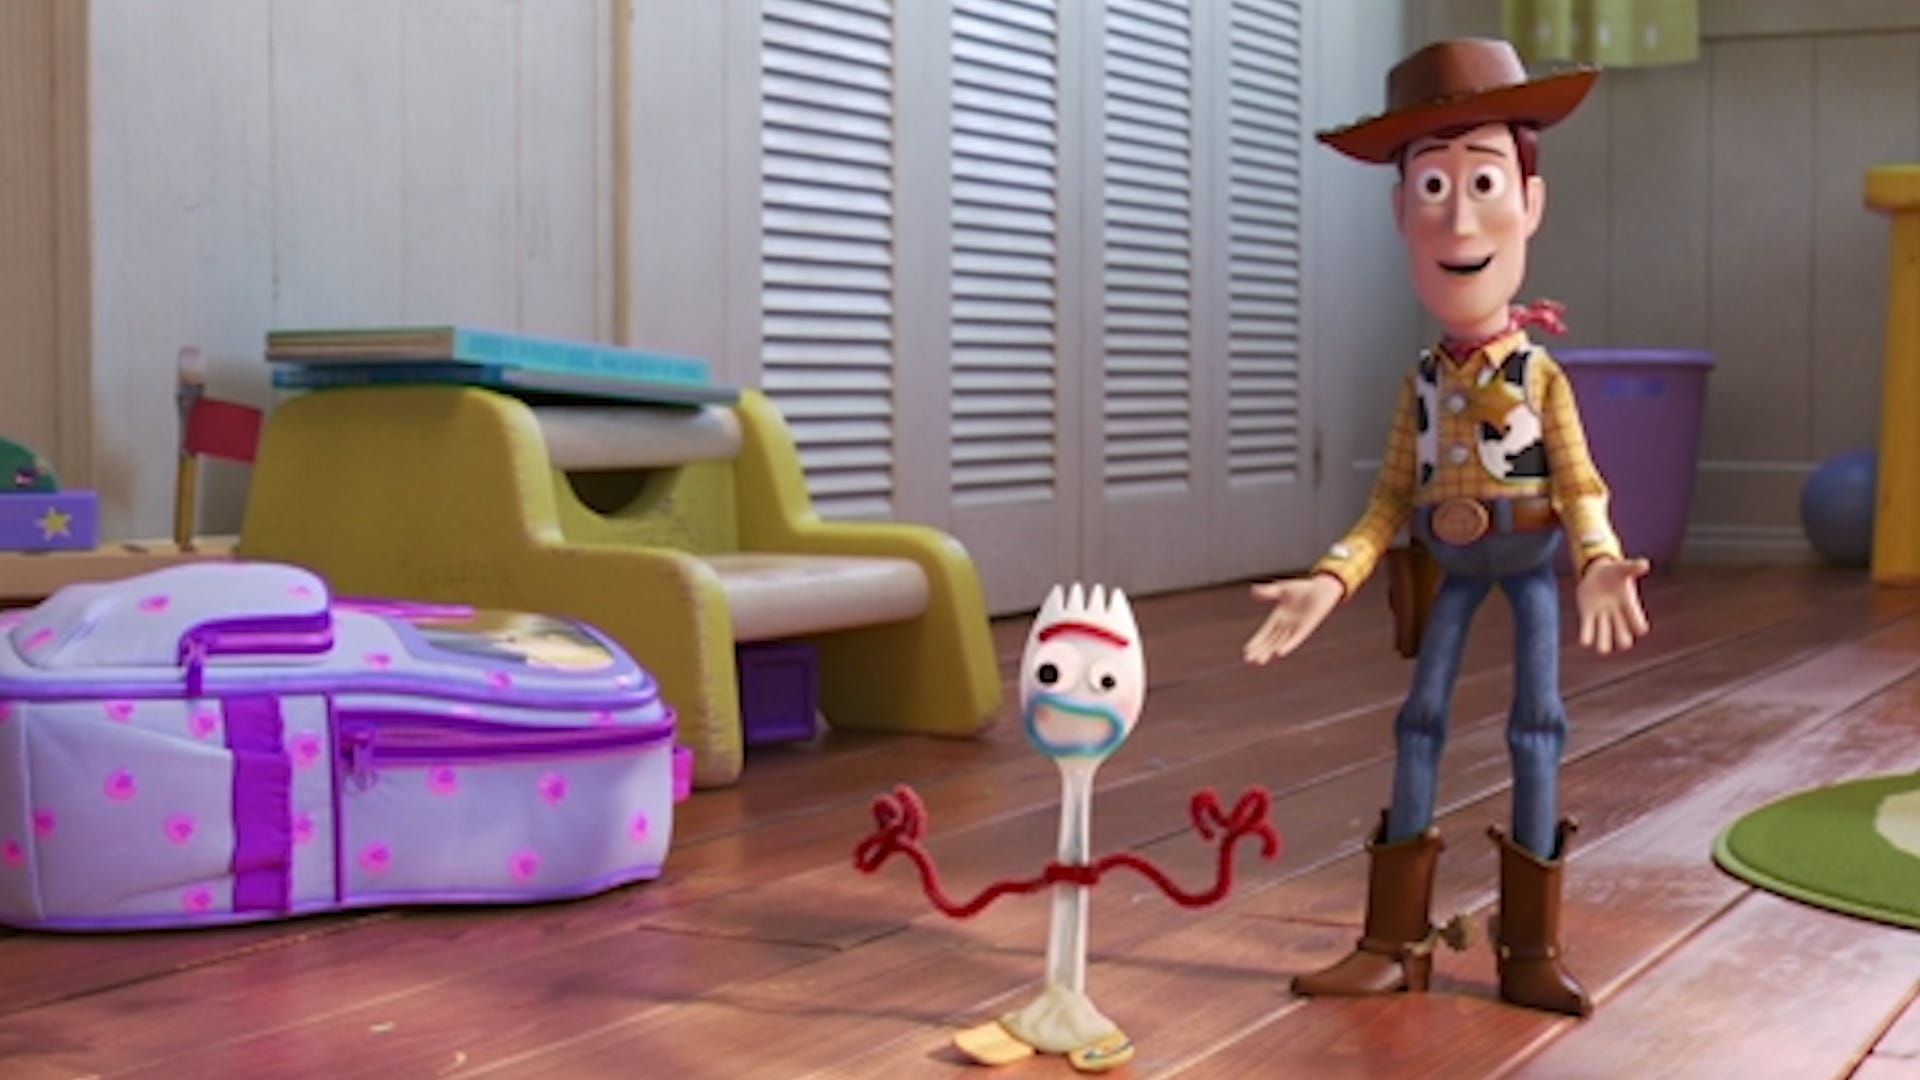 download the last version for iphoneToy Story 4